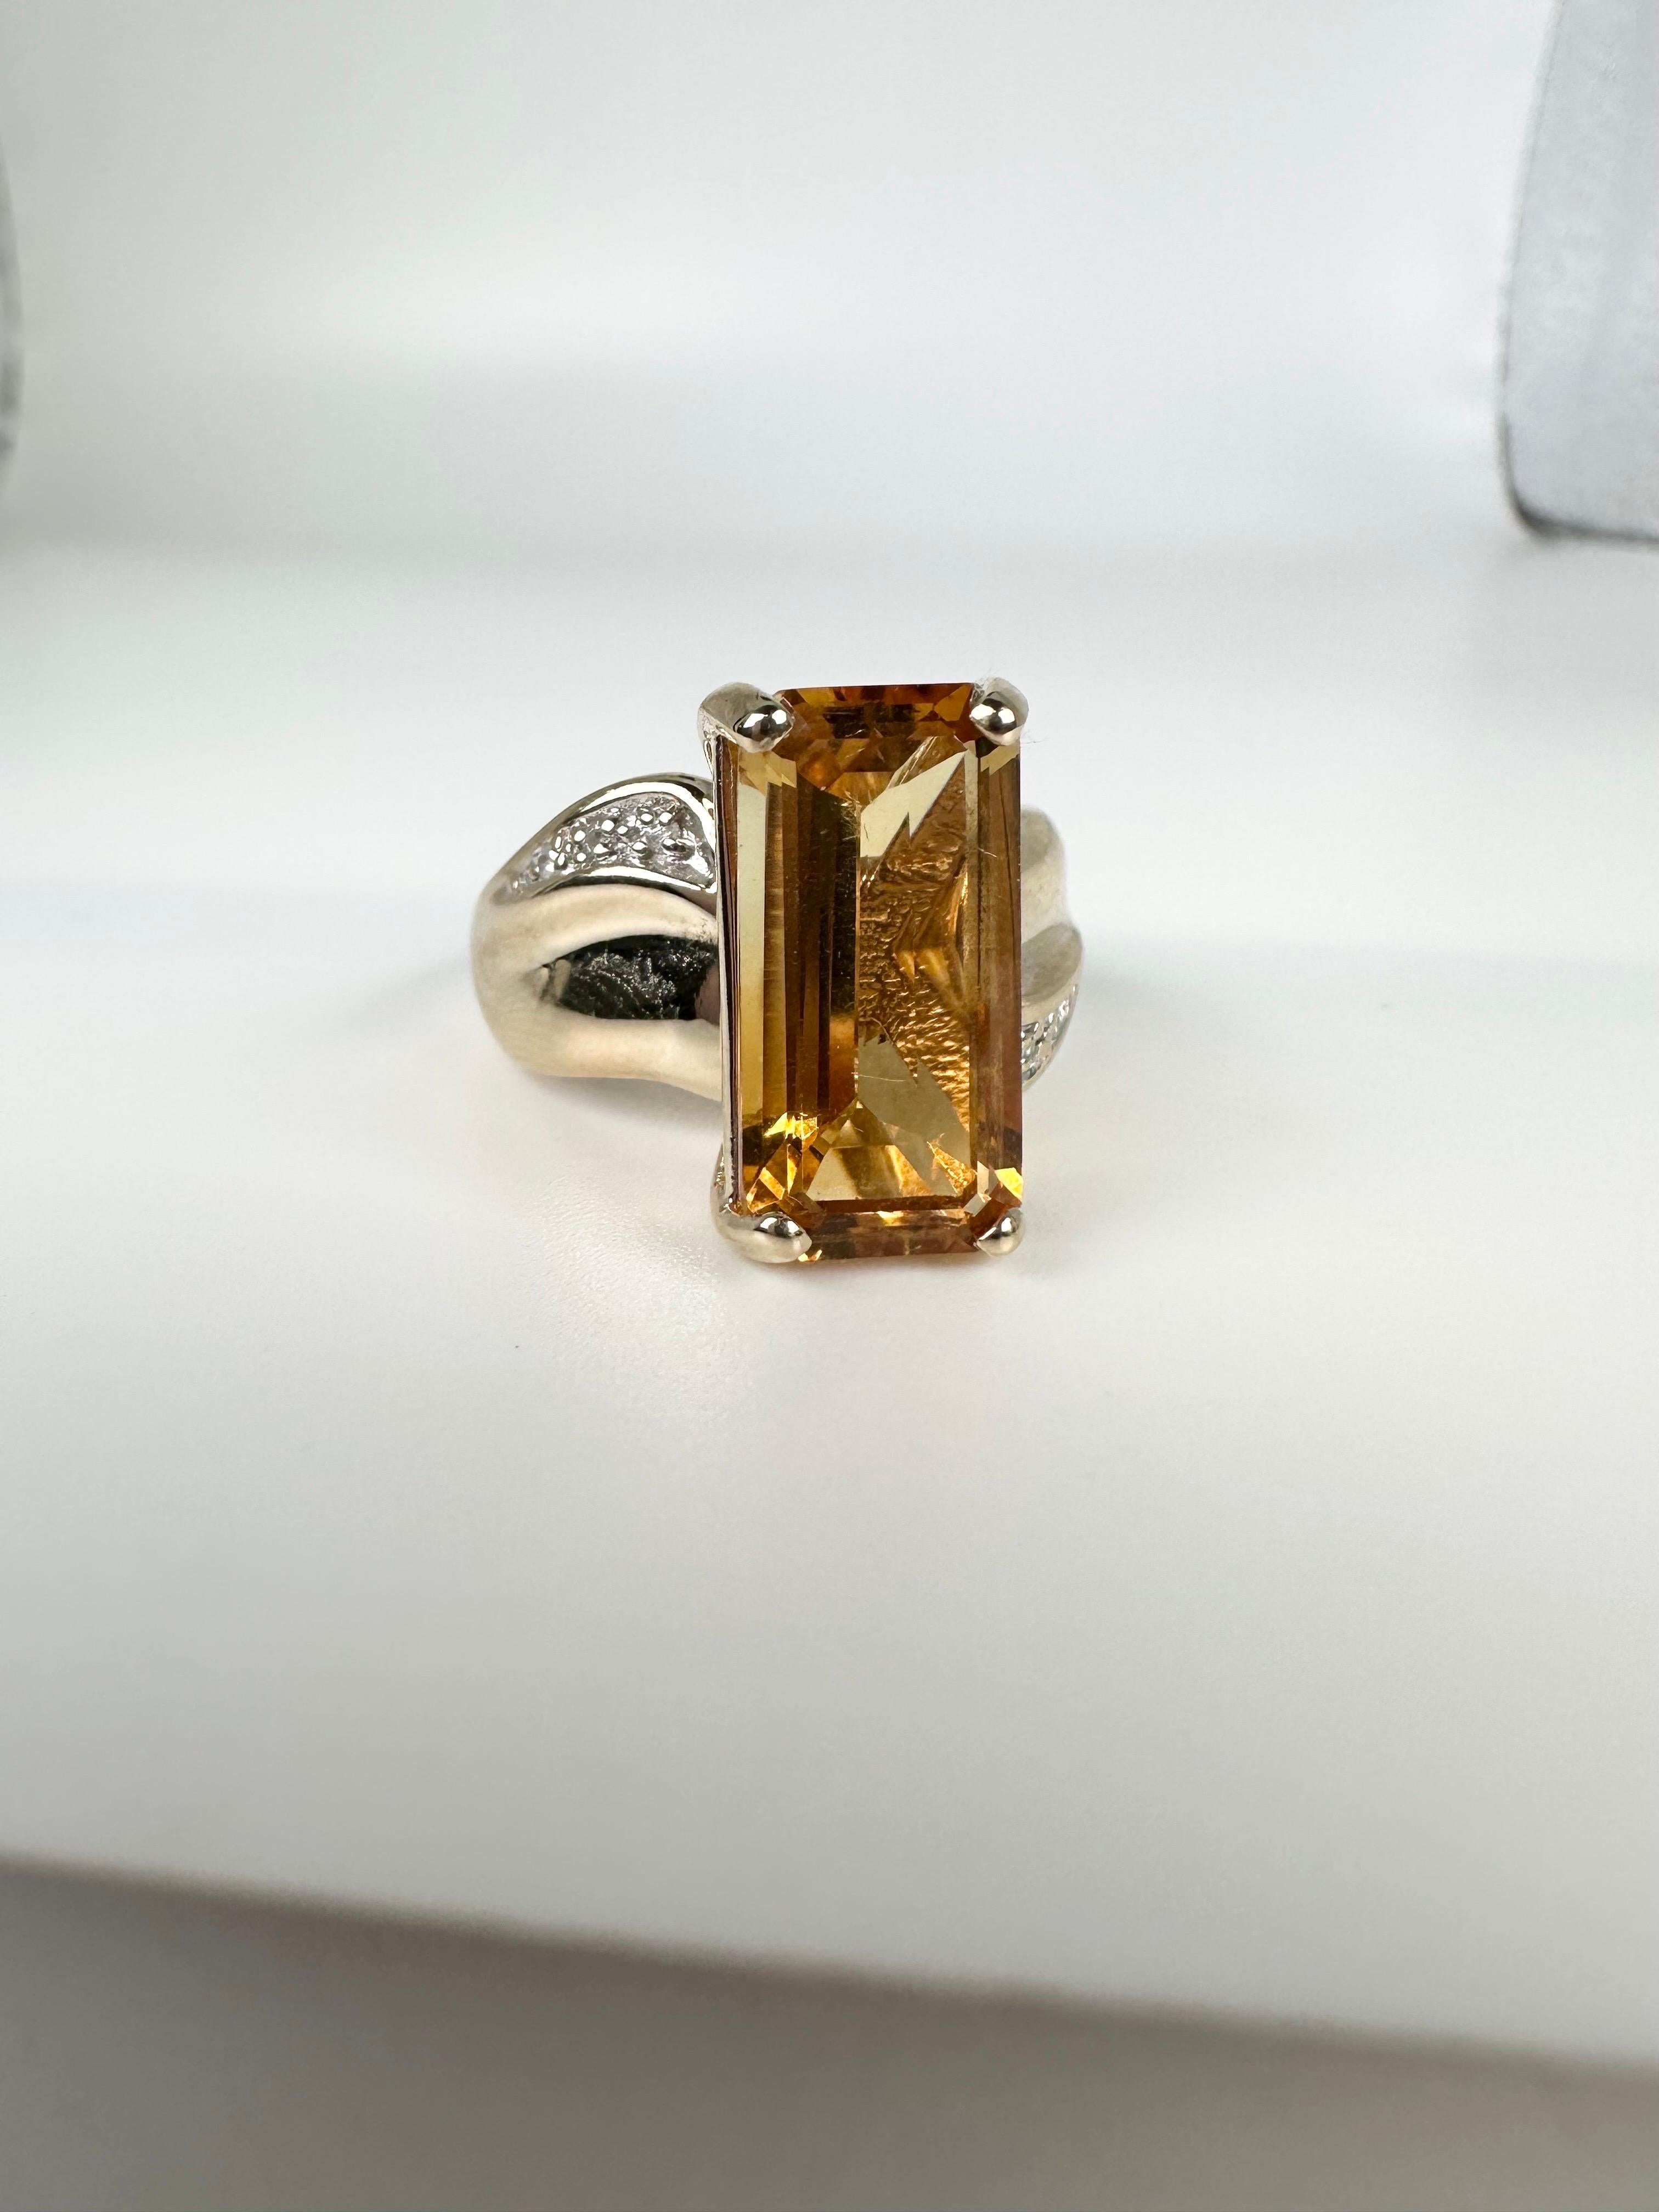 Cognac Citrine Diamond Ring 14 Karat Yellow Gold Stunning Cocktail Ring In New Condition For Sale In Jupiter, FL